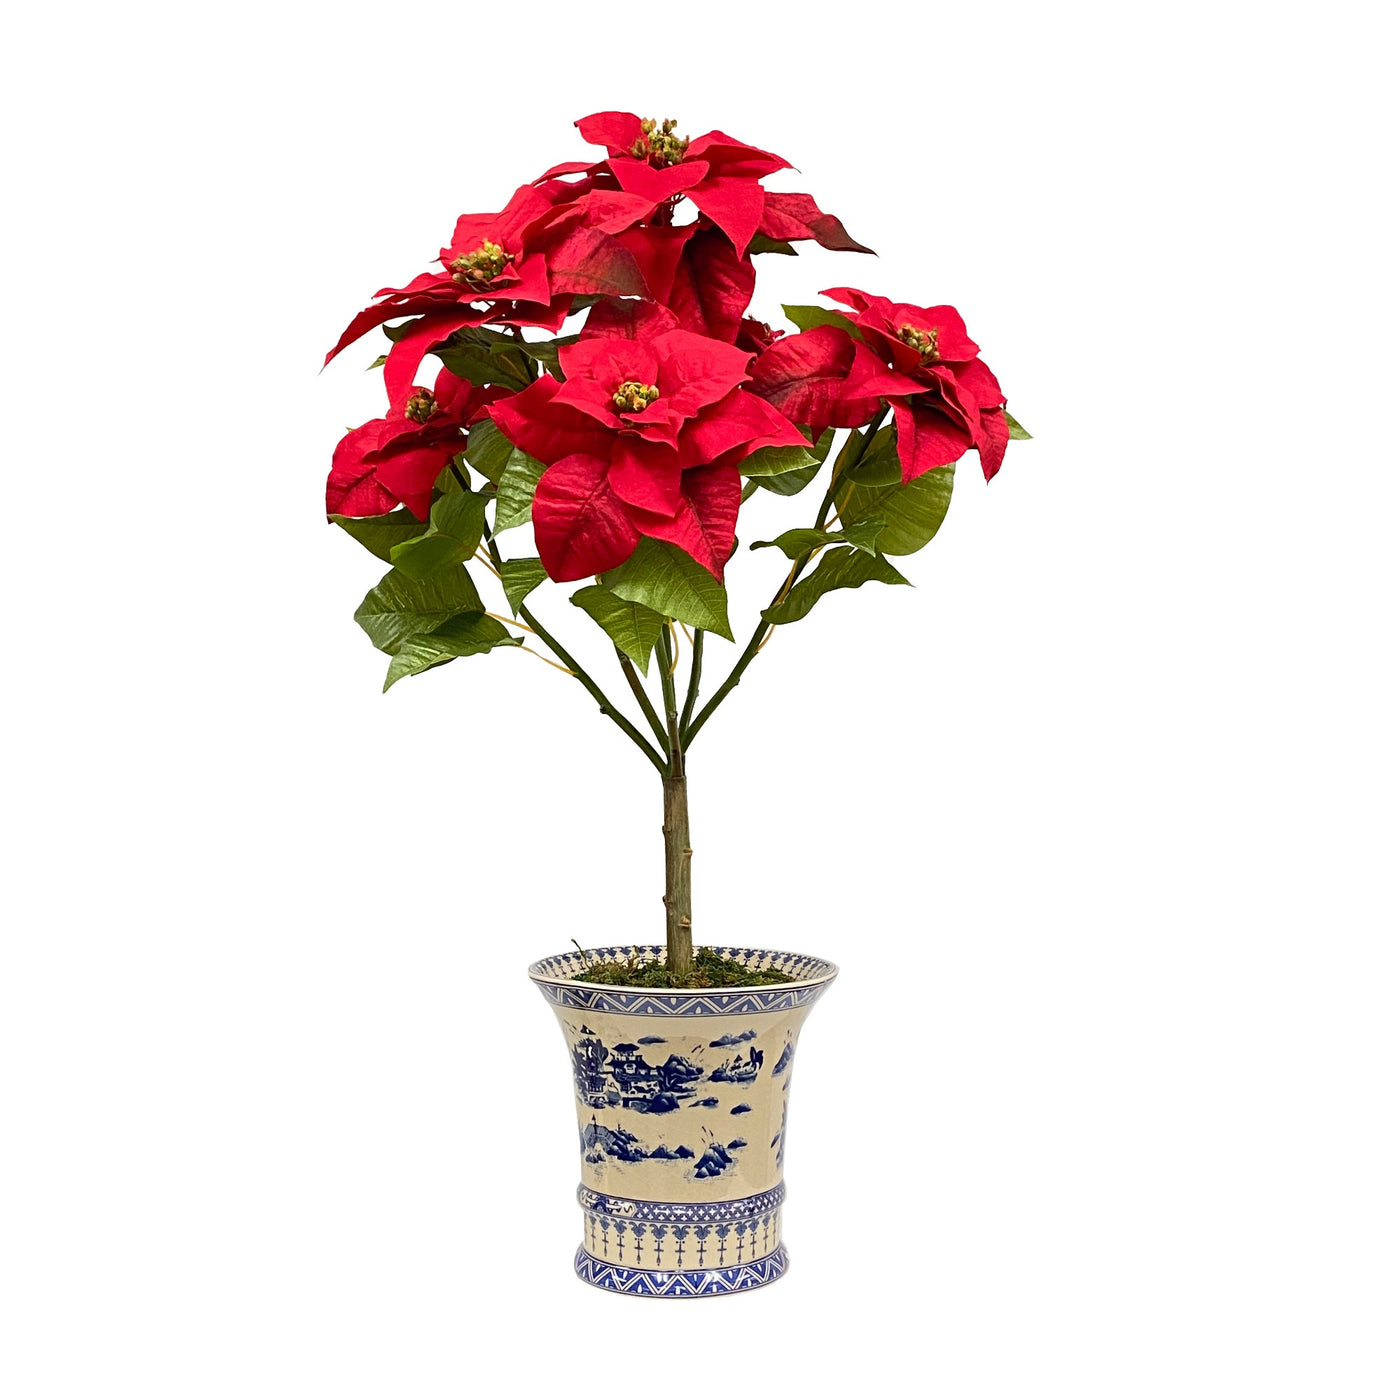 red poinsettia in blue and white planter